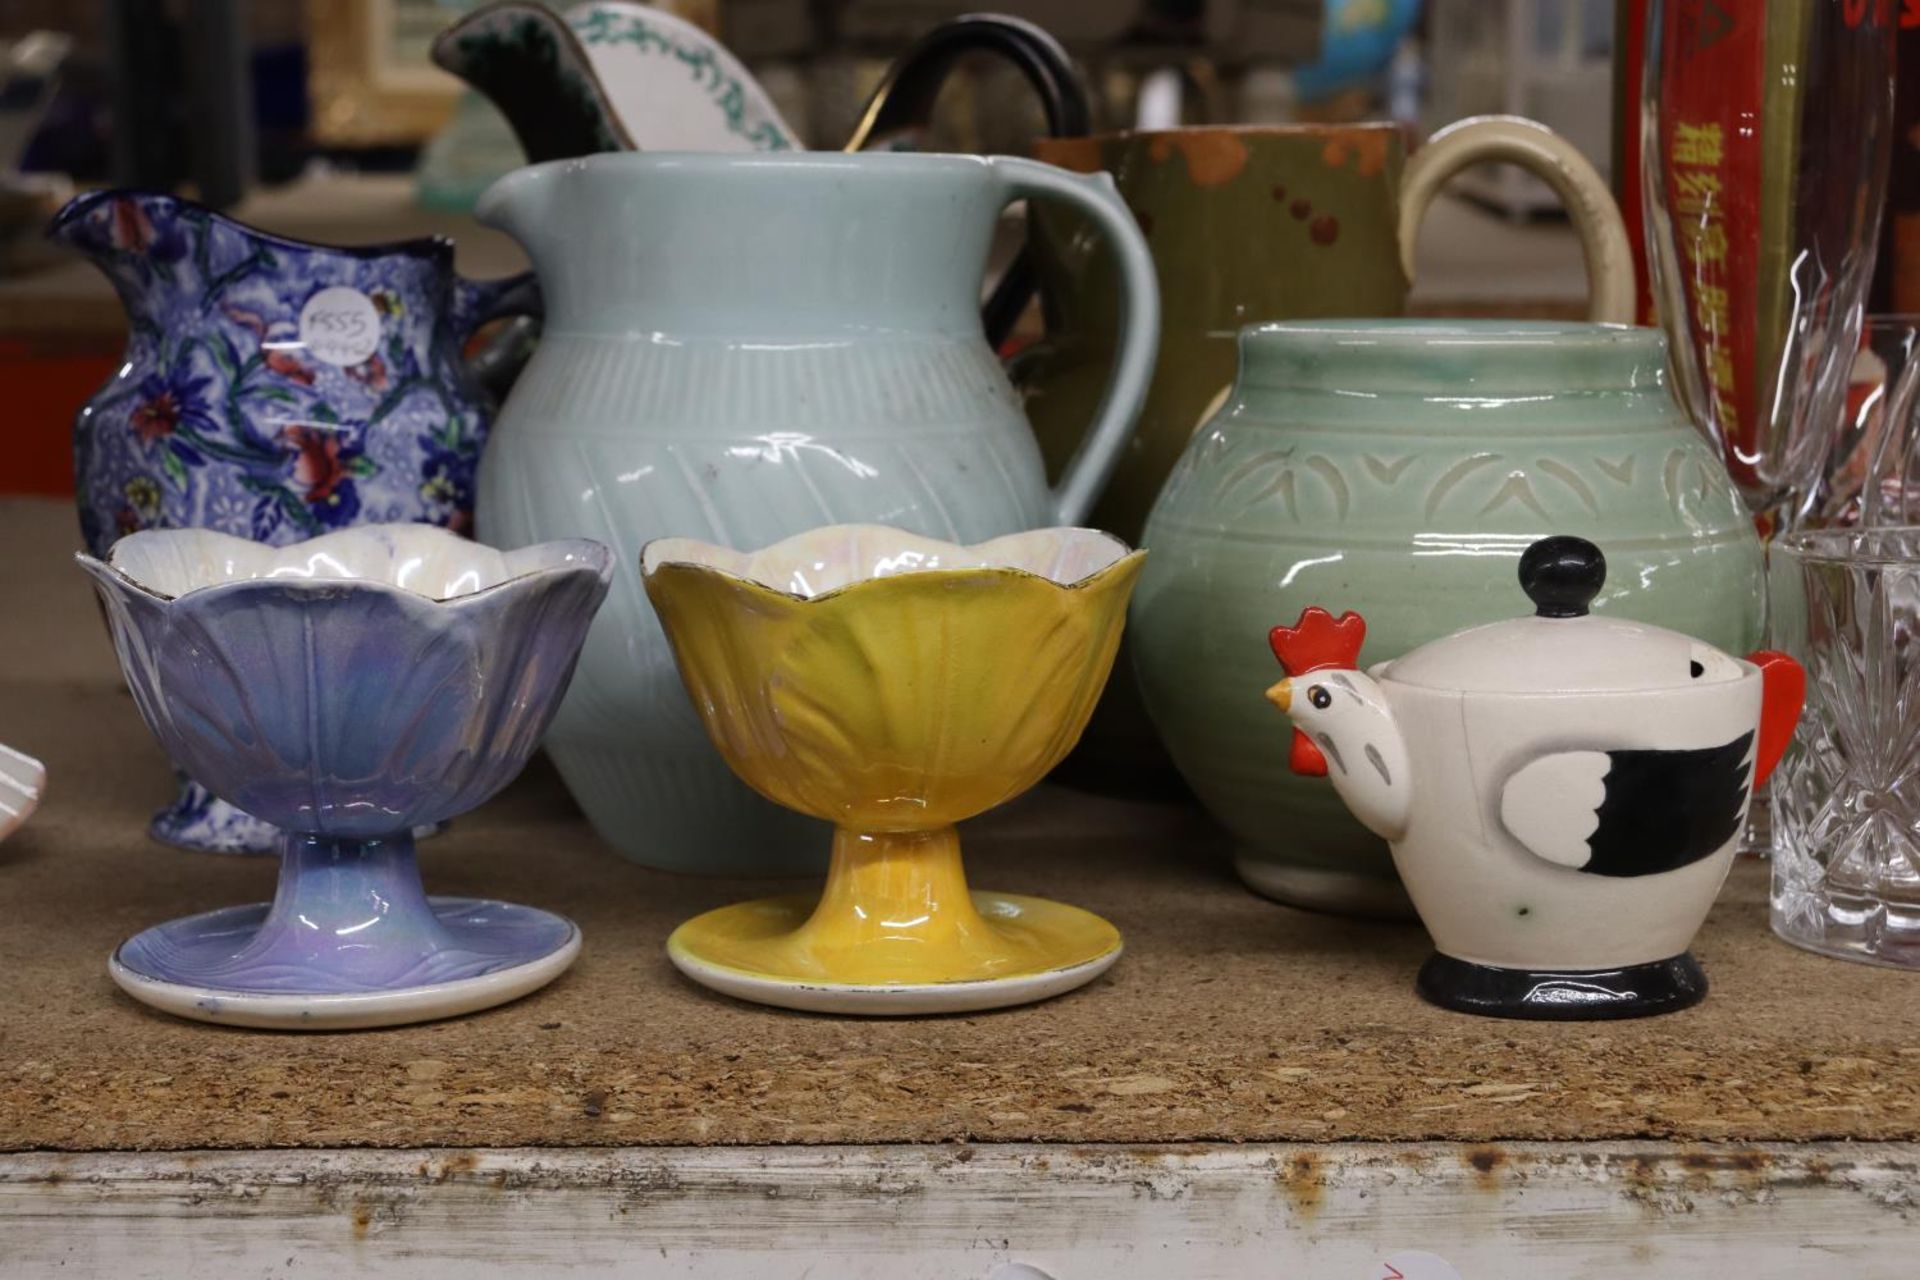 A QUANTITY OF VINTAGE CERAMICS TO INCLUDE JUGS, VASES, BOWLS, ETC - Image 2 of 4